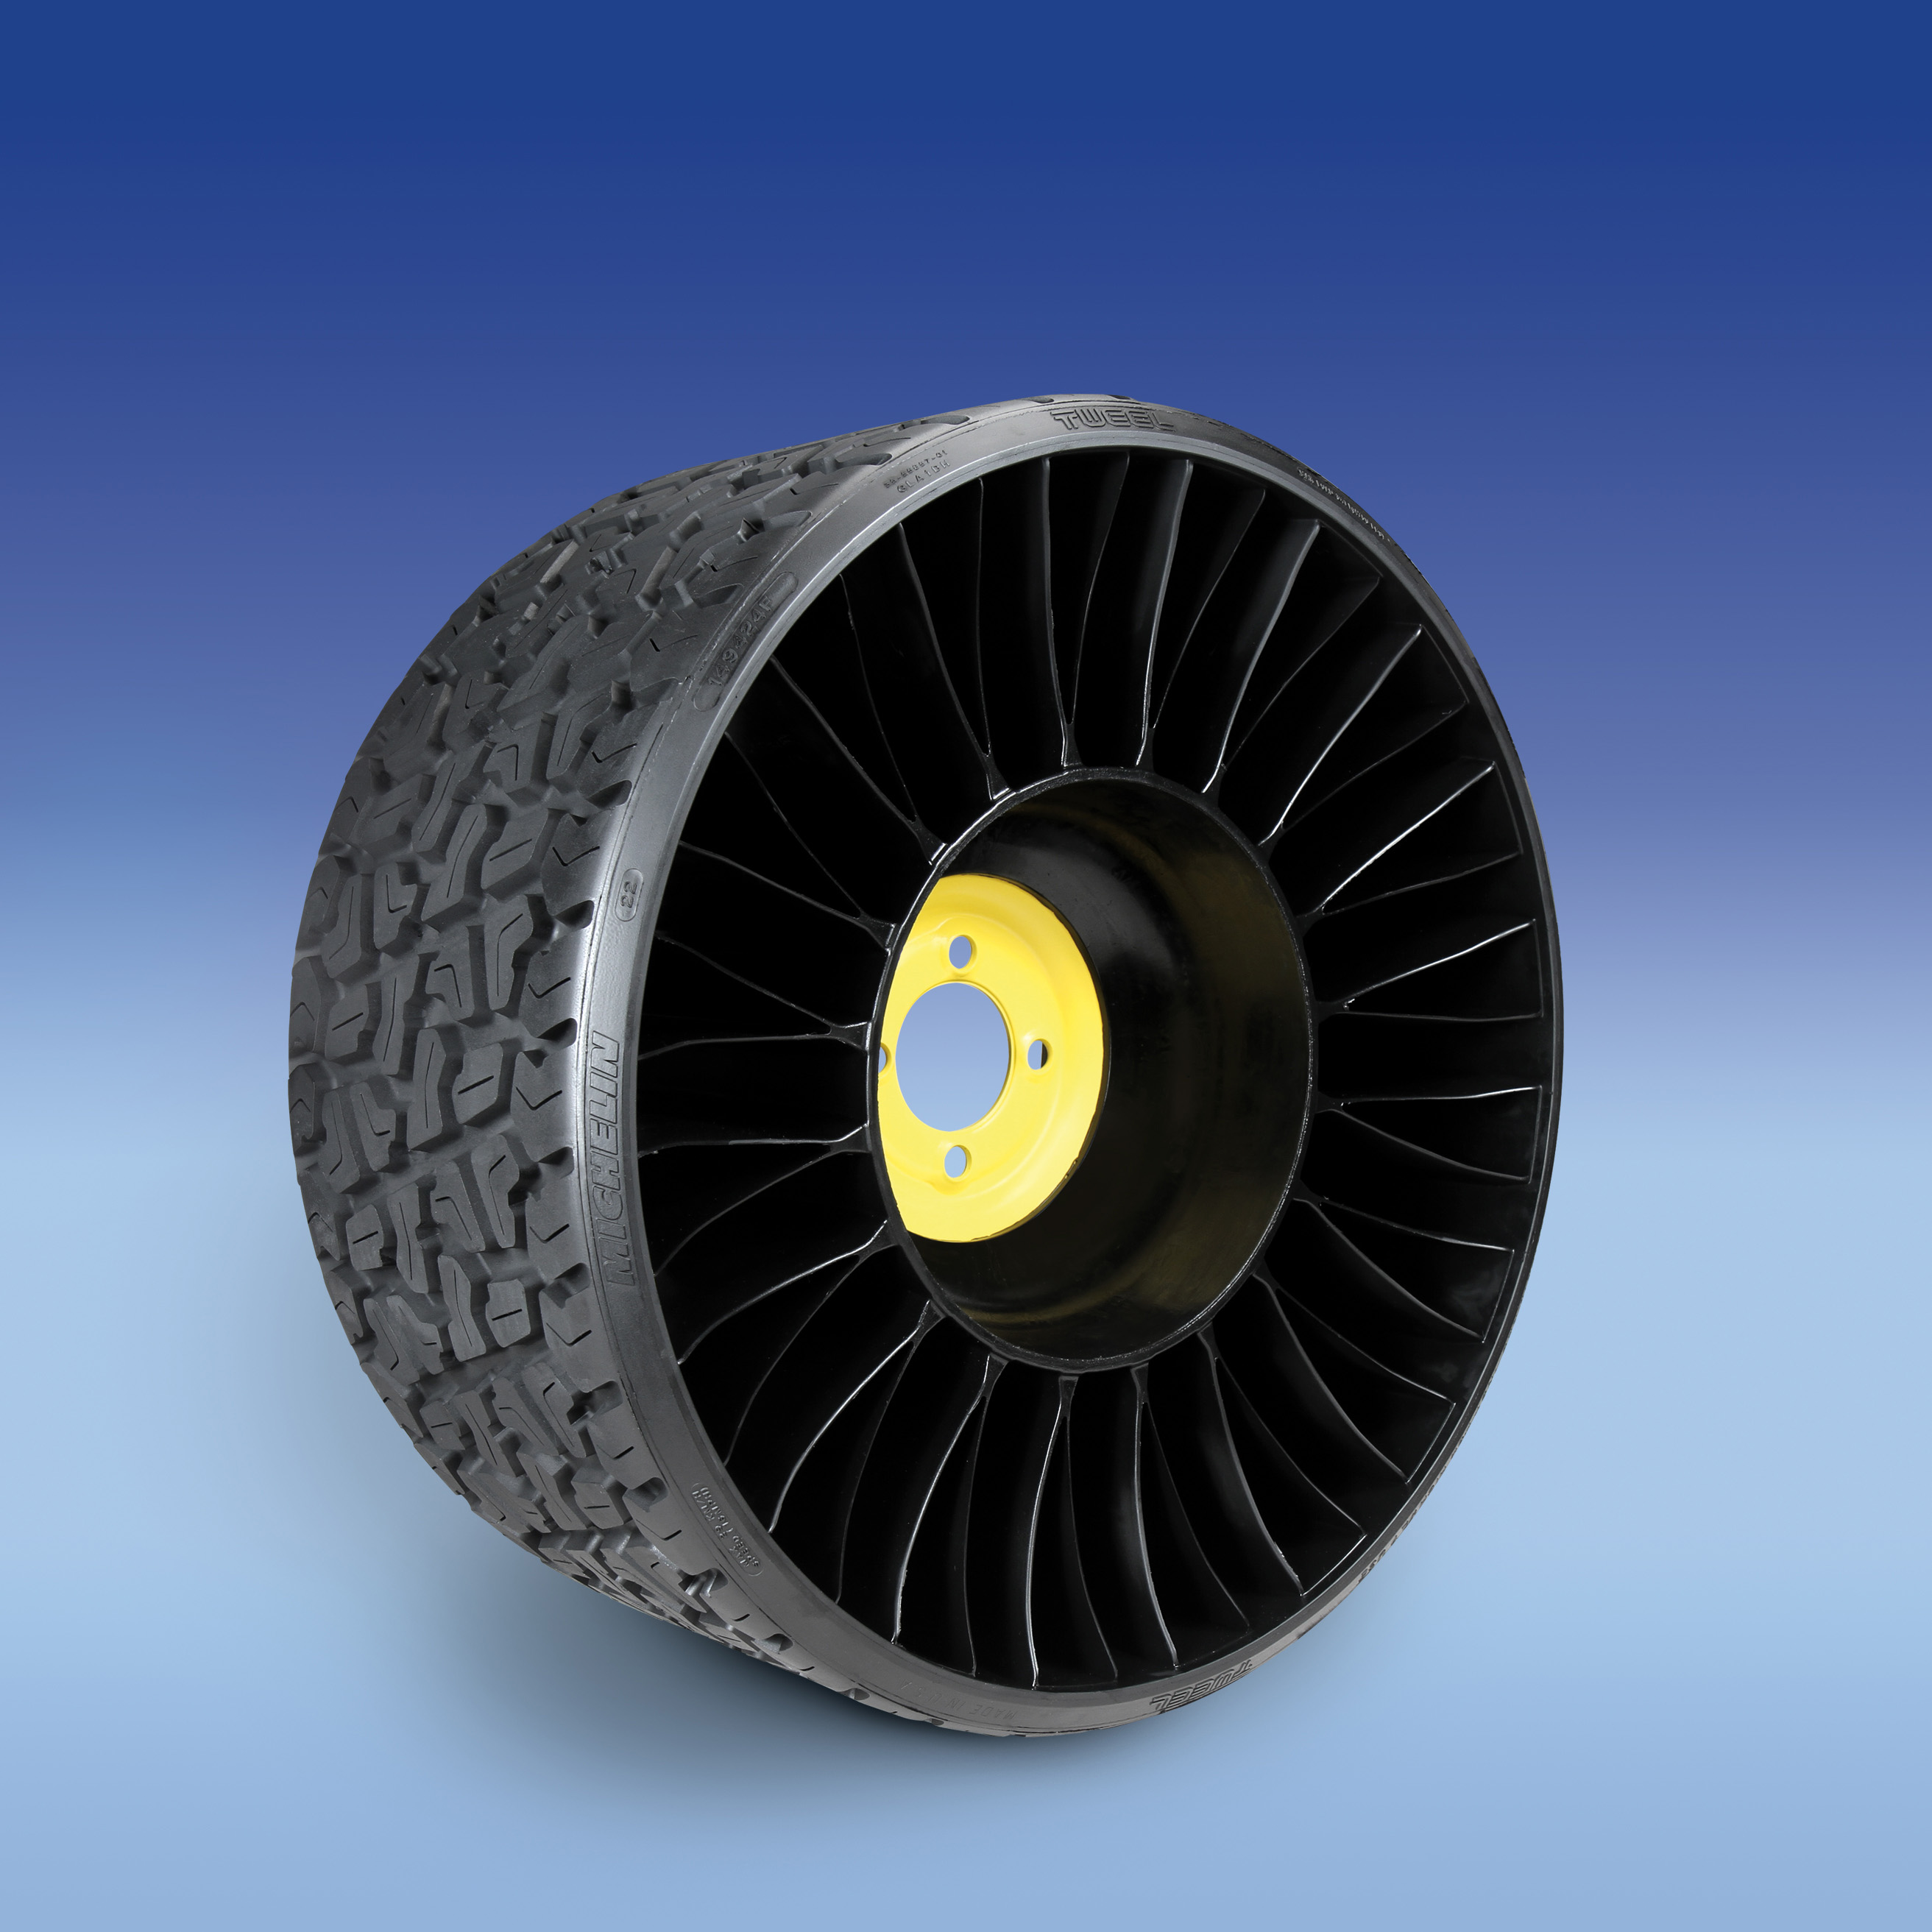 MICHELIN TO PROVIDE AIRLESS RADIAL TIRE FOR JOHN DEERE ...